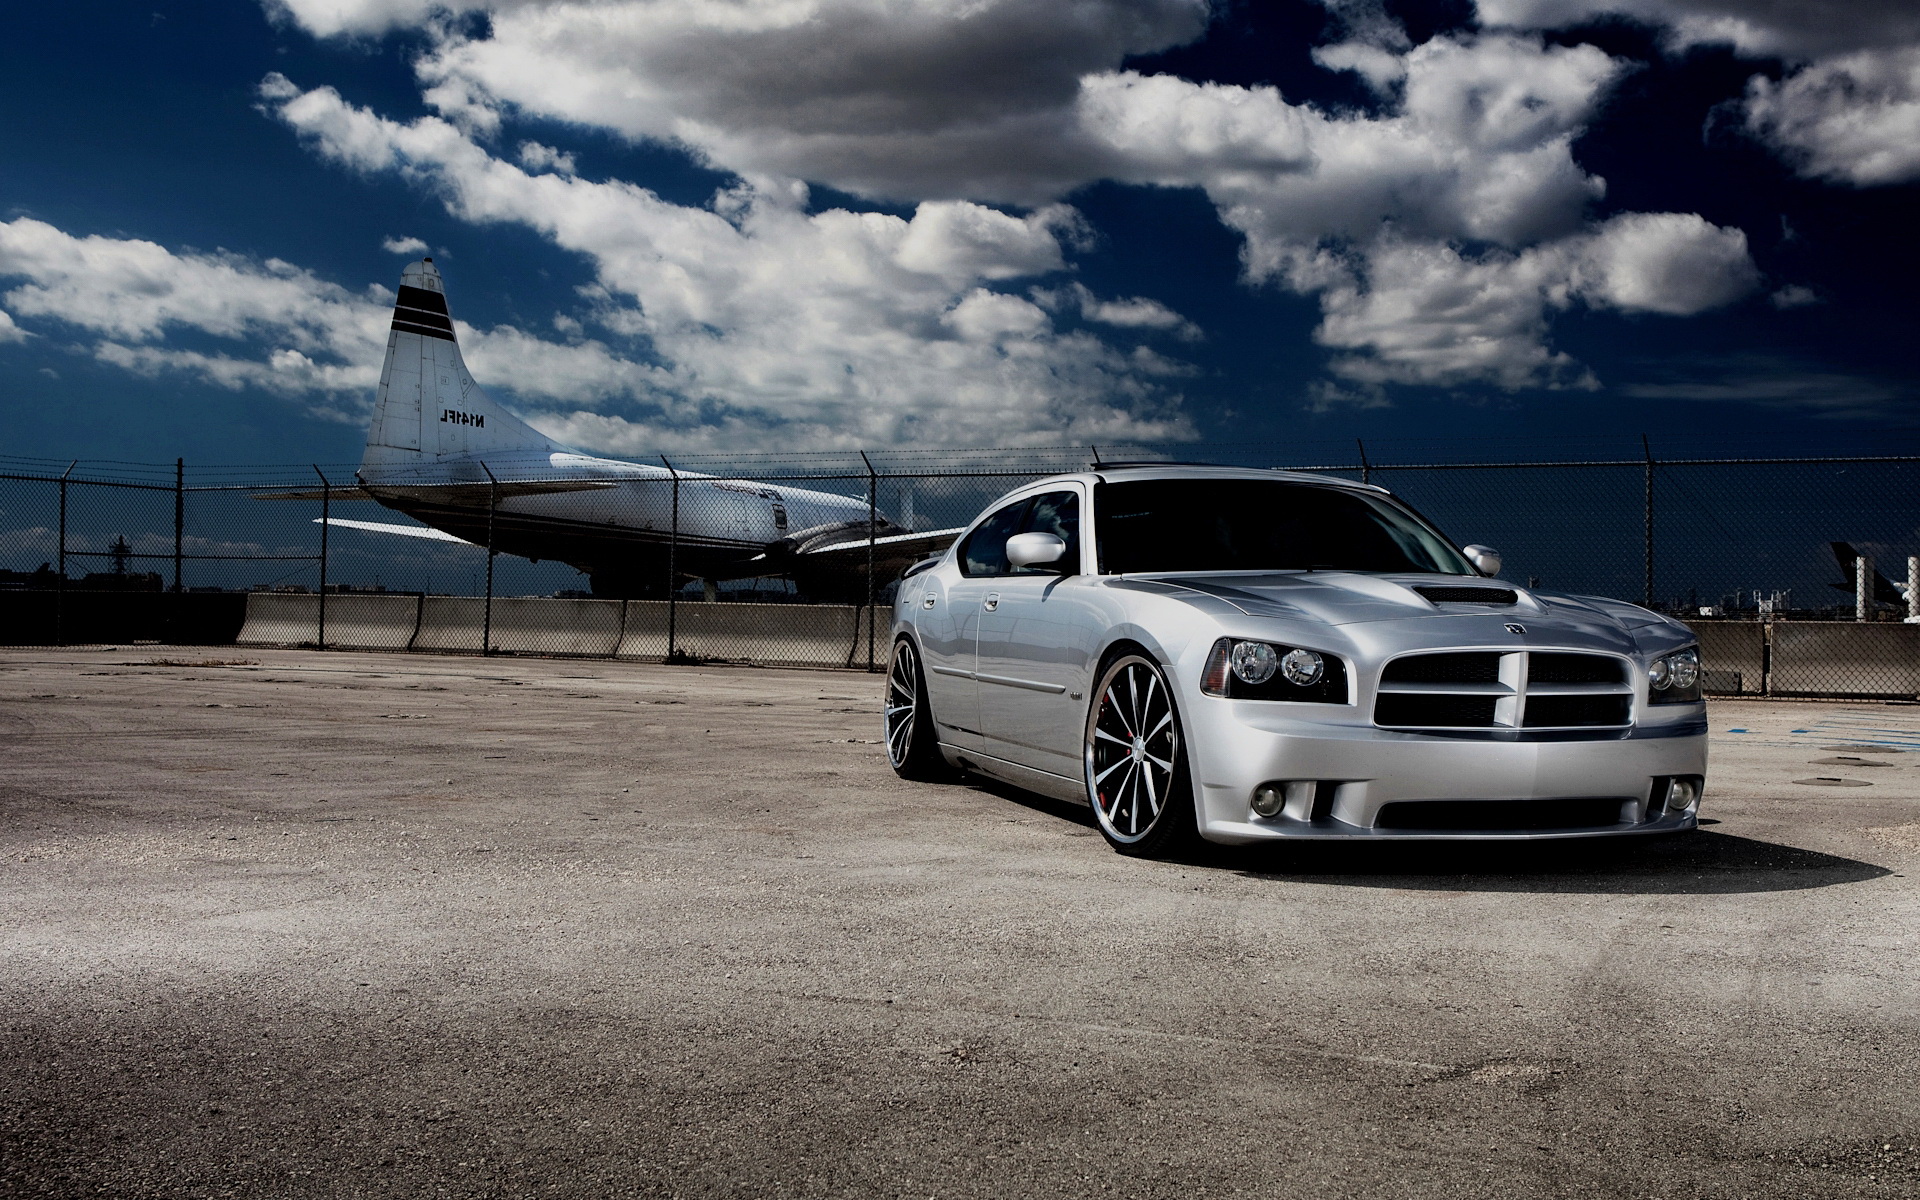 Dodge Charger HD Wallpaper Background Image 1920x1200 ID